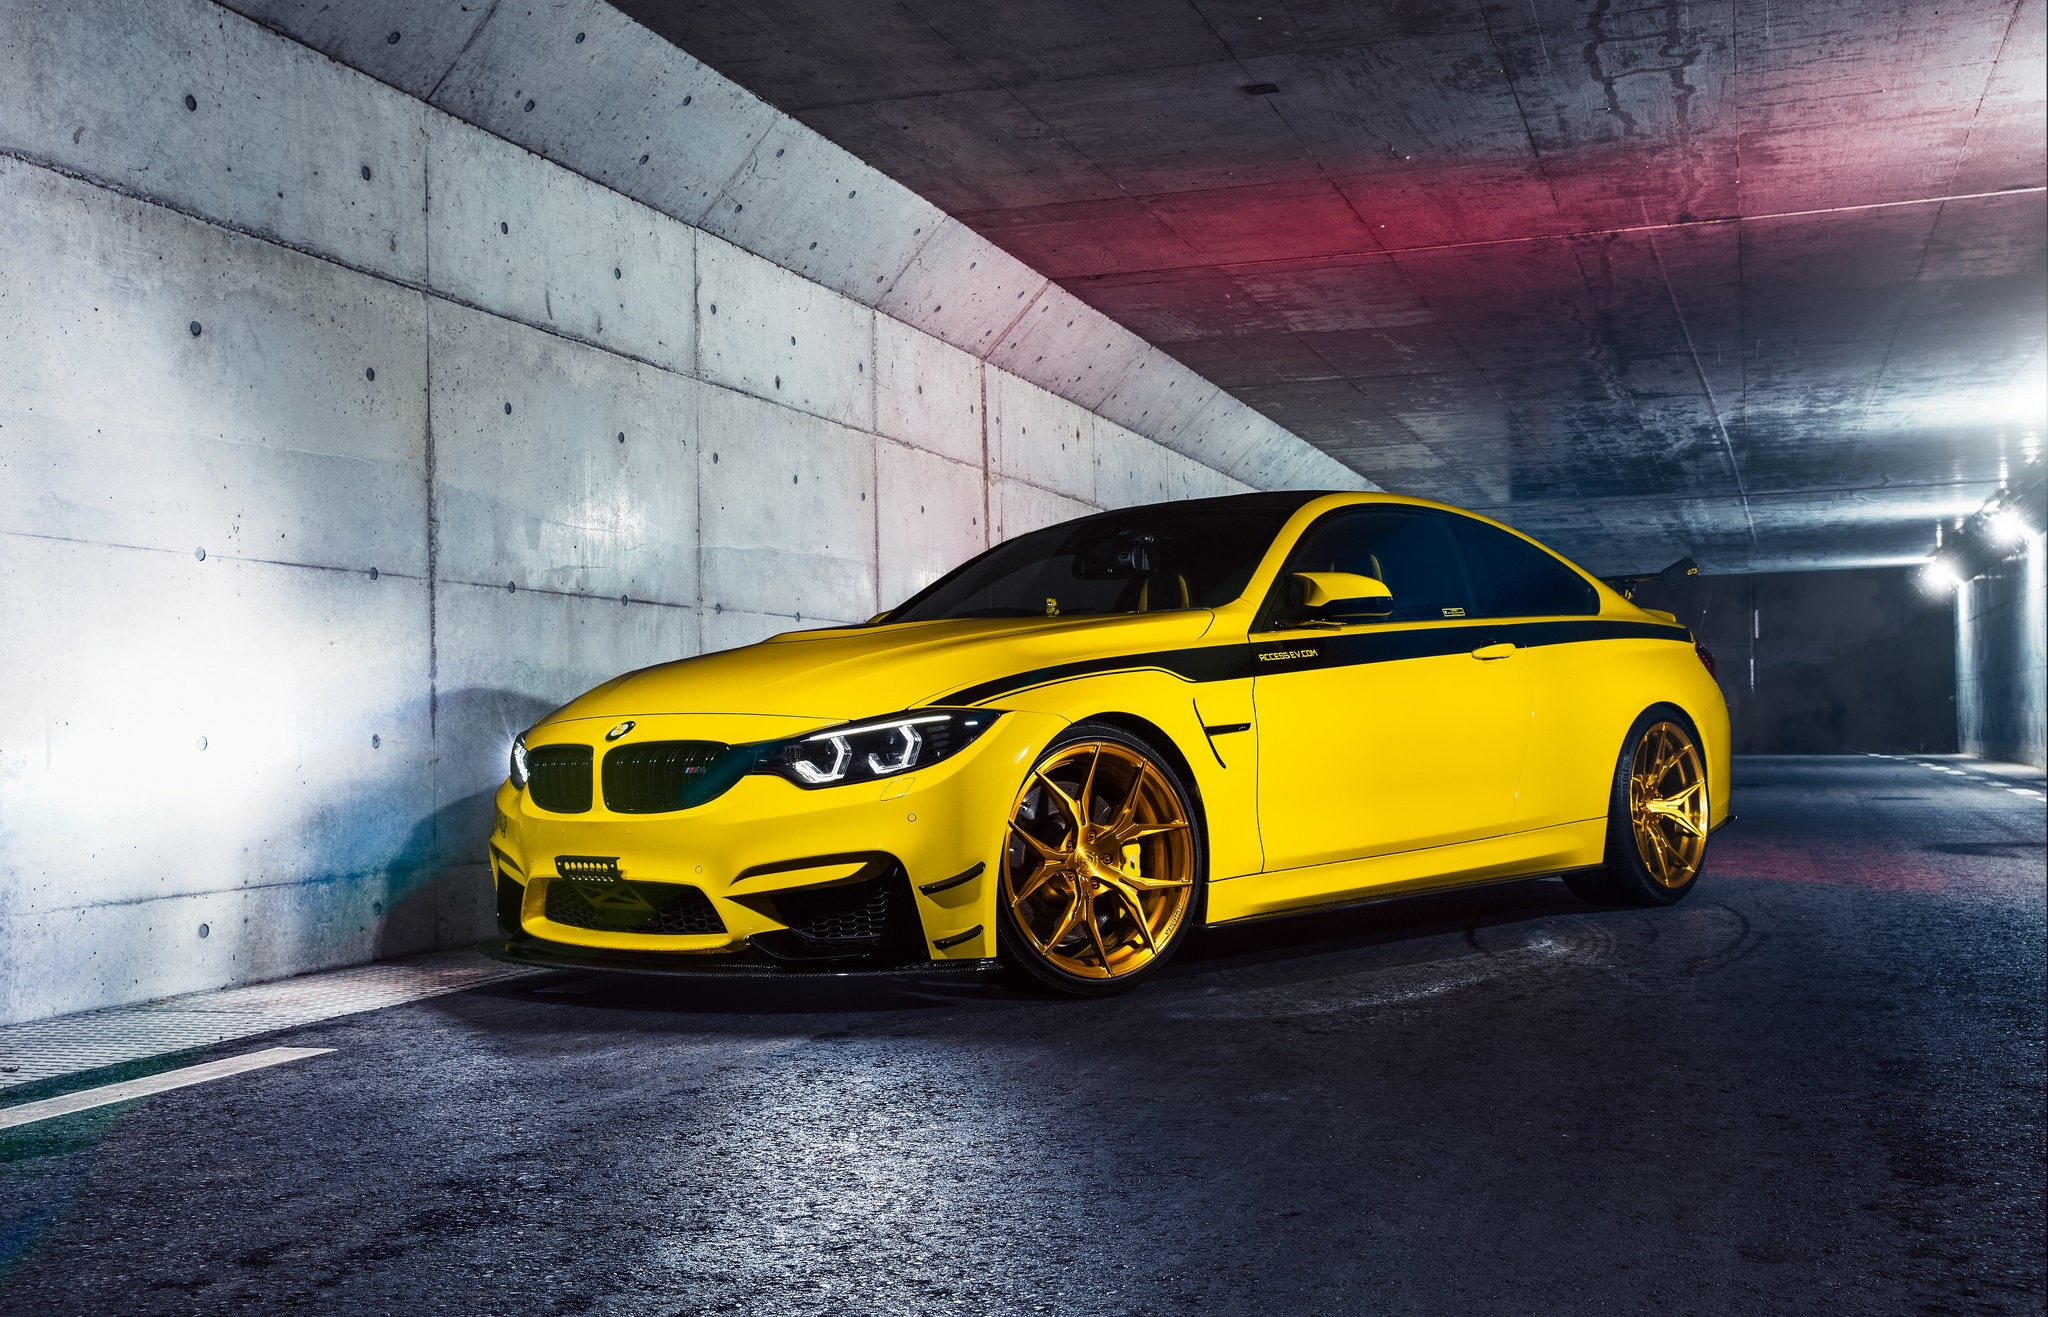 Free photo Yellow bmw m4 f82 on gold rims with a black stripe on the side